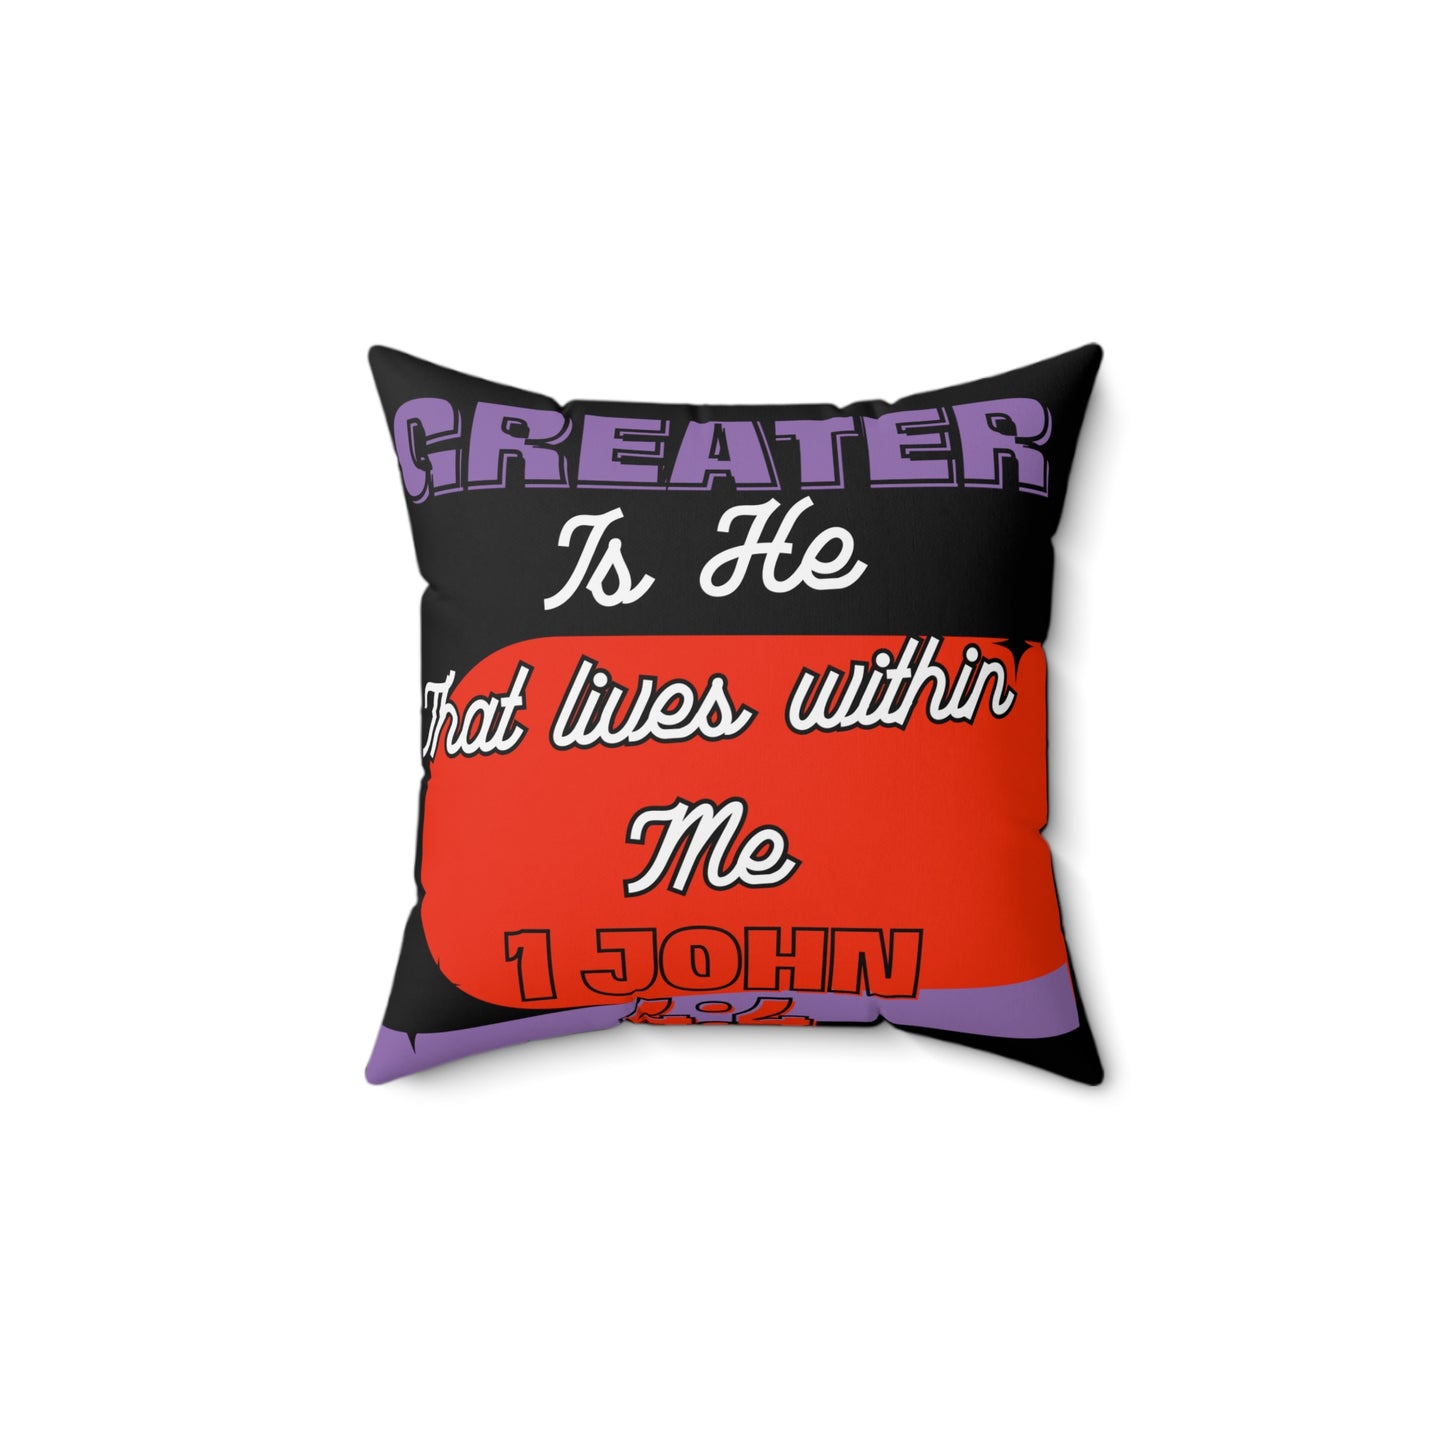 Greater is He Square Pillow: 1 John 4:4 Scripture Design